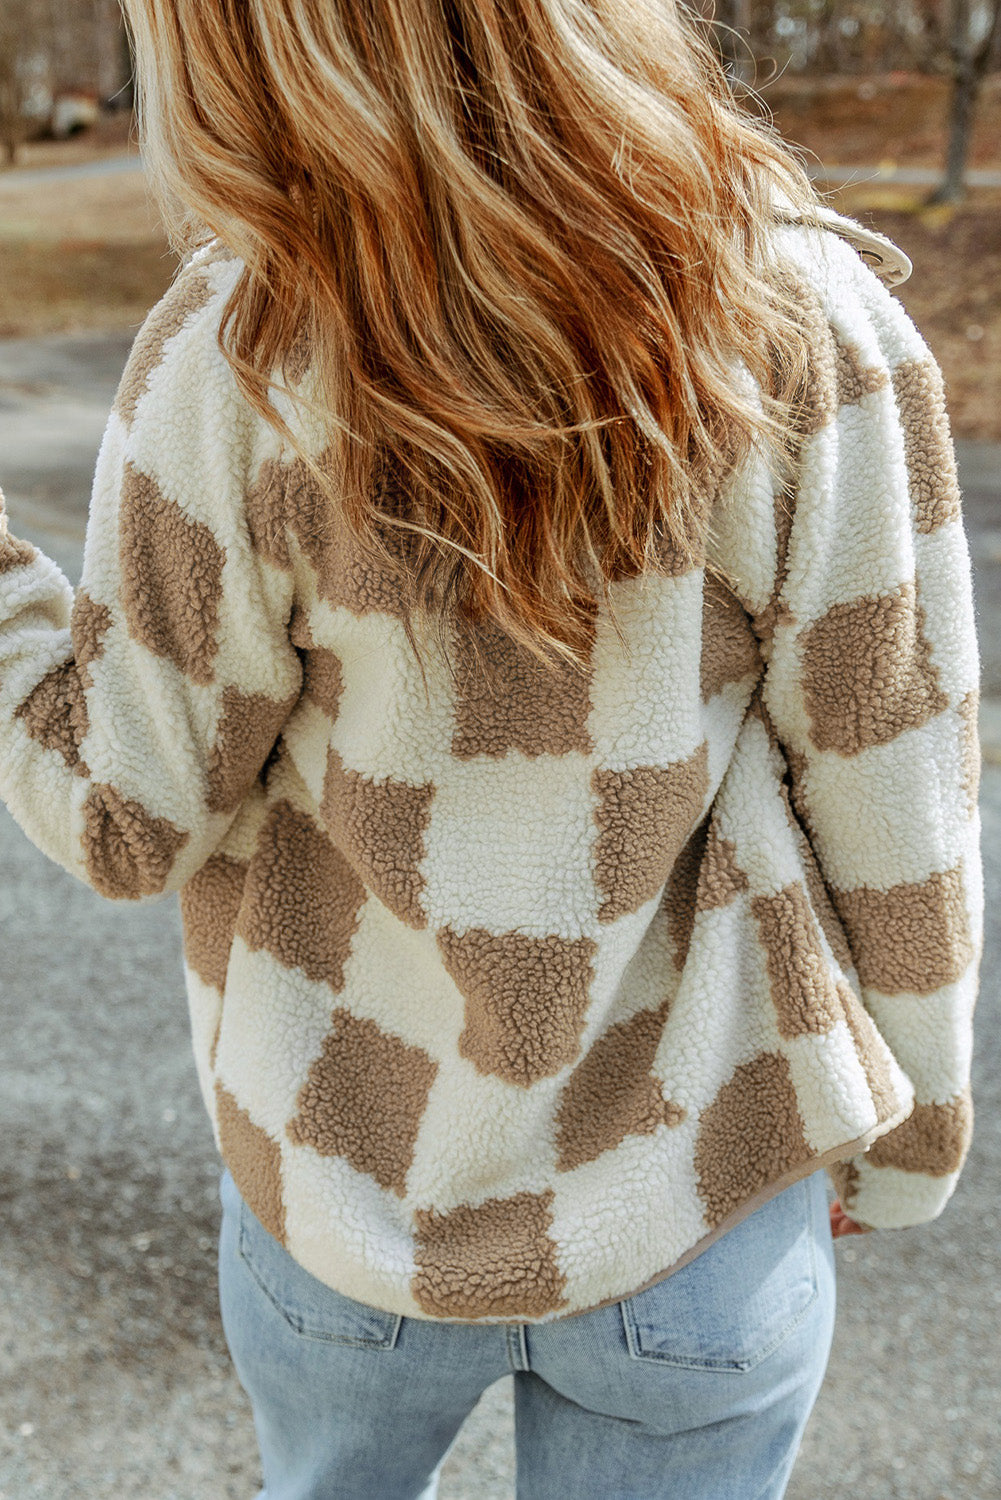 Cali Chic Brown Checked Snap Button Sherpa Jacket